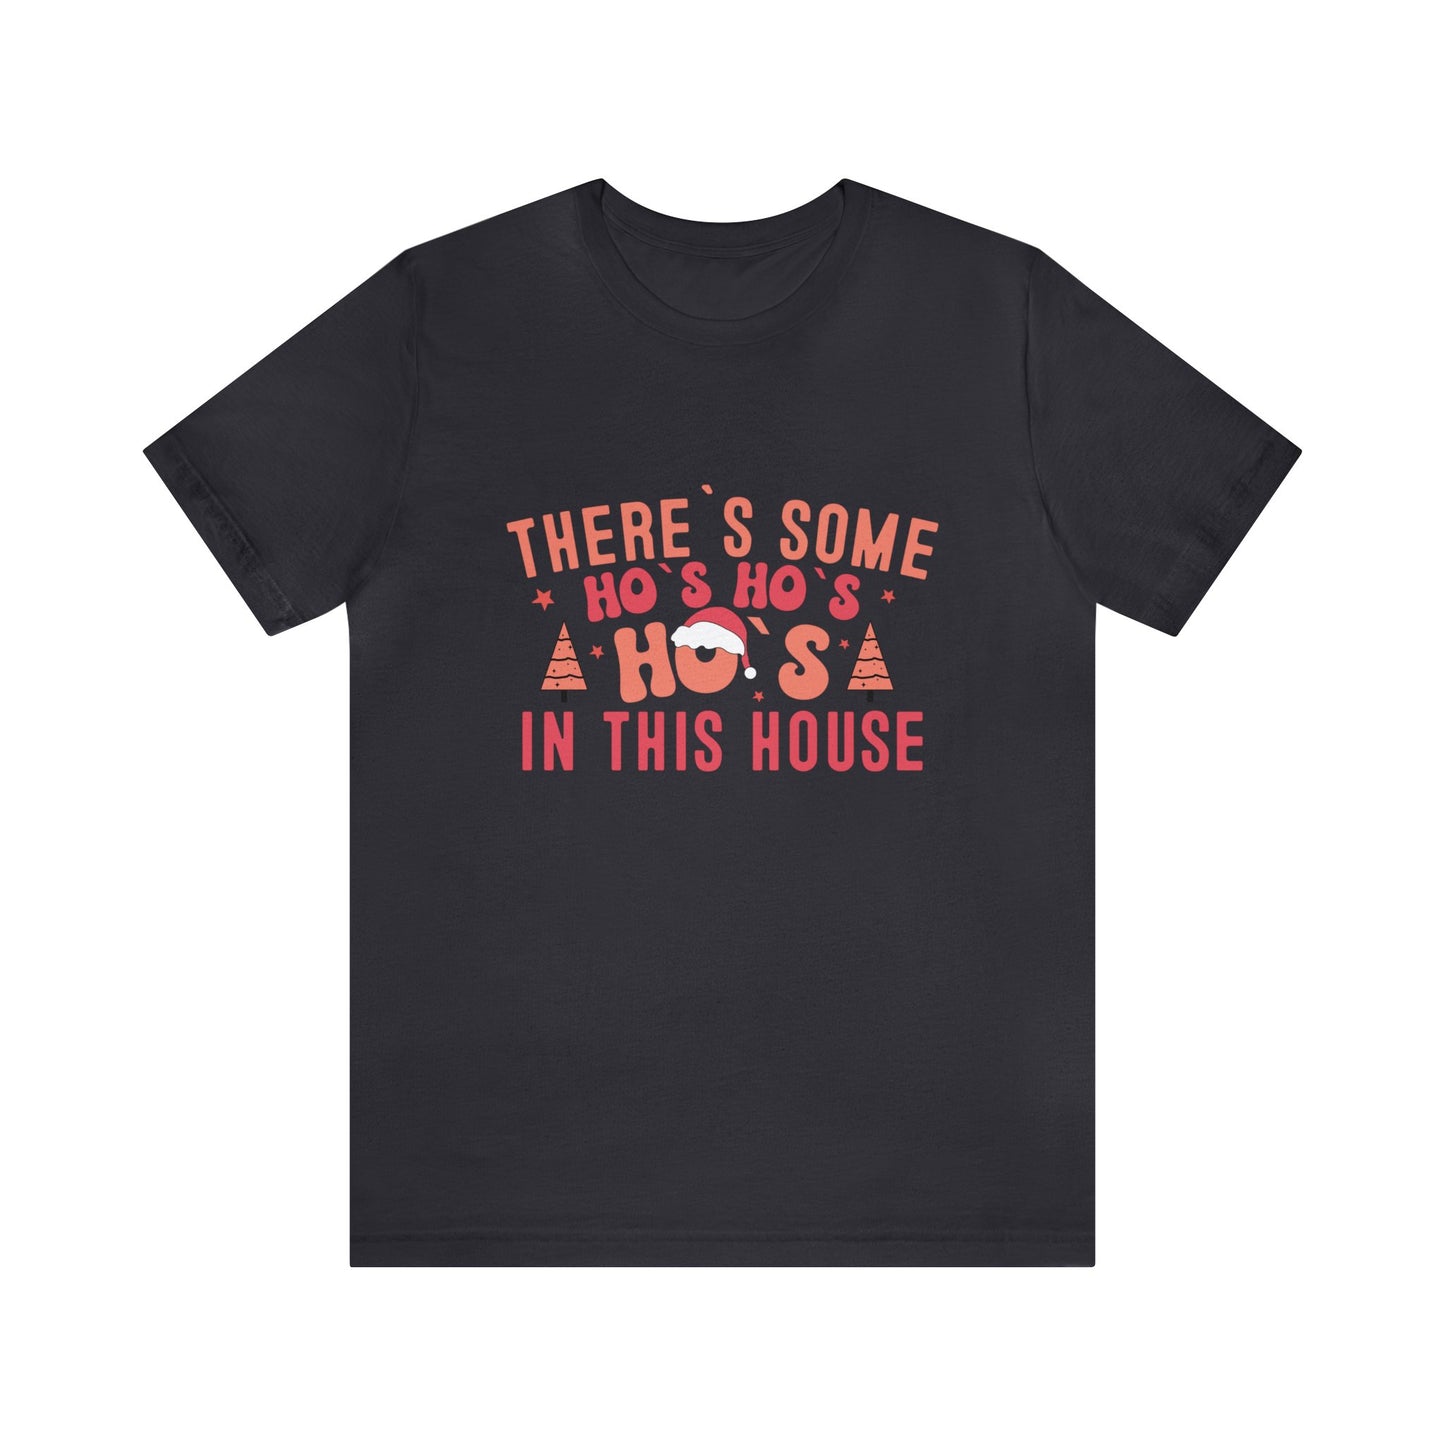 There's some ho ho hos in the house Women's Funny Christmas Short Sleeve Shirt